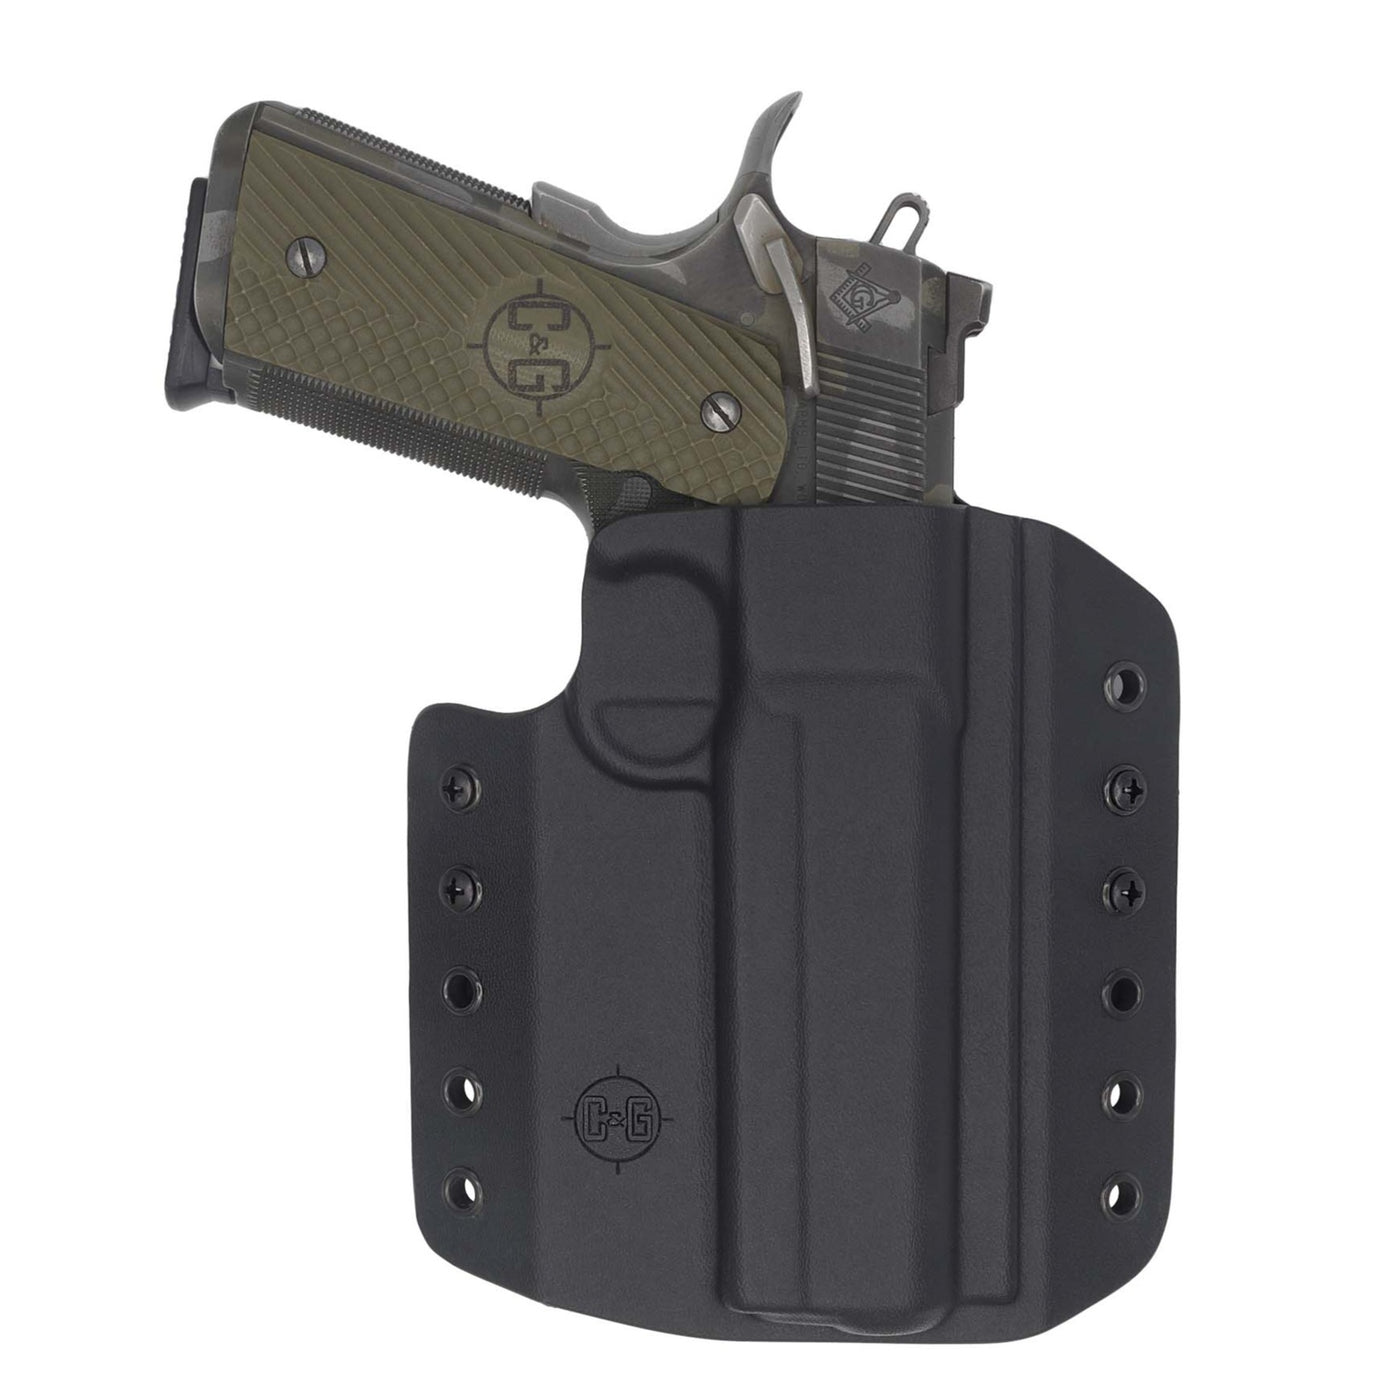 C&G Holsters OWB Outside the waistband Holster for the 1911 5" Railed